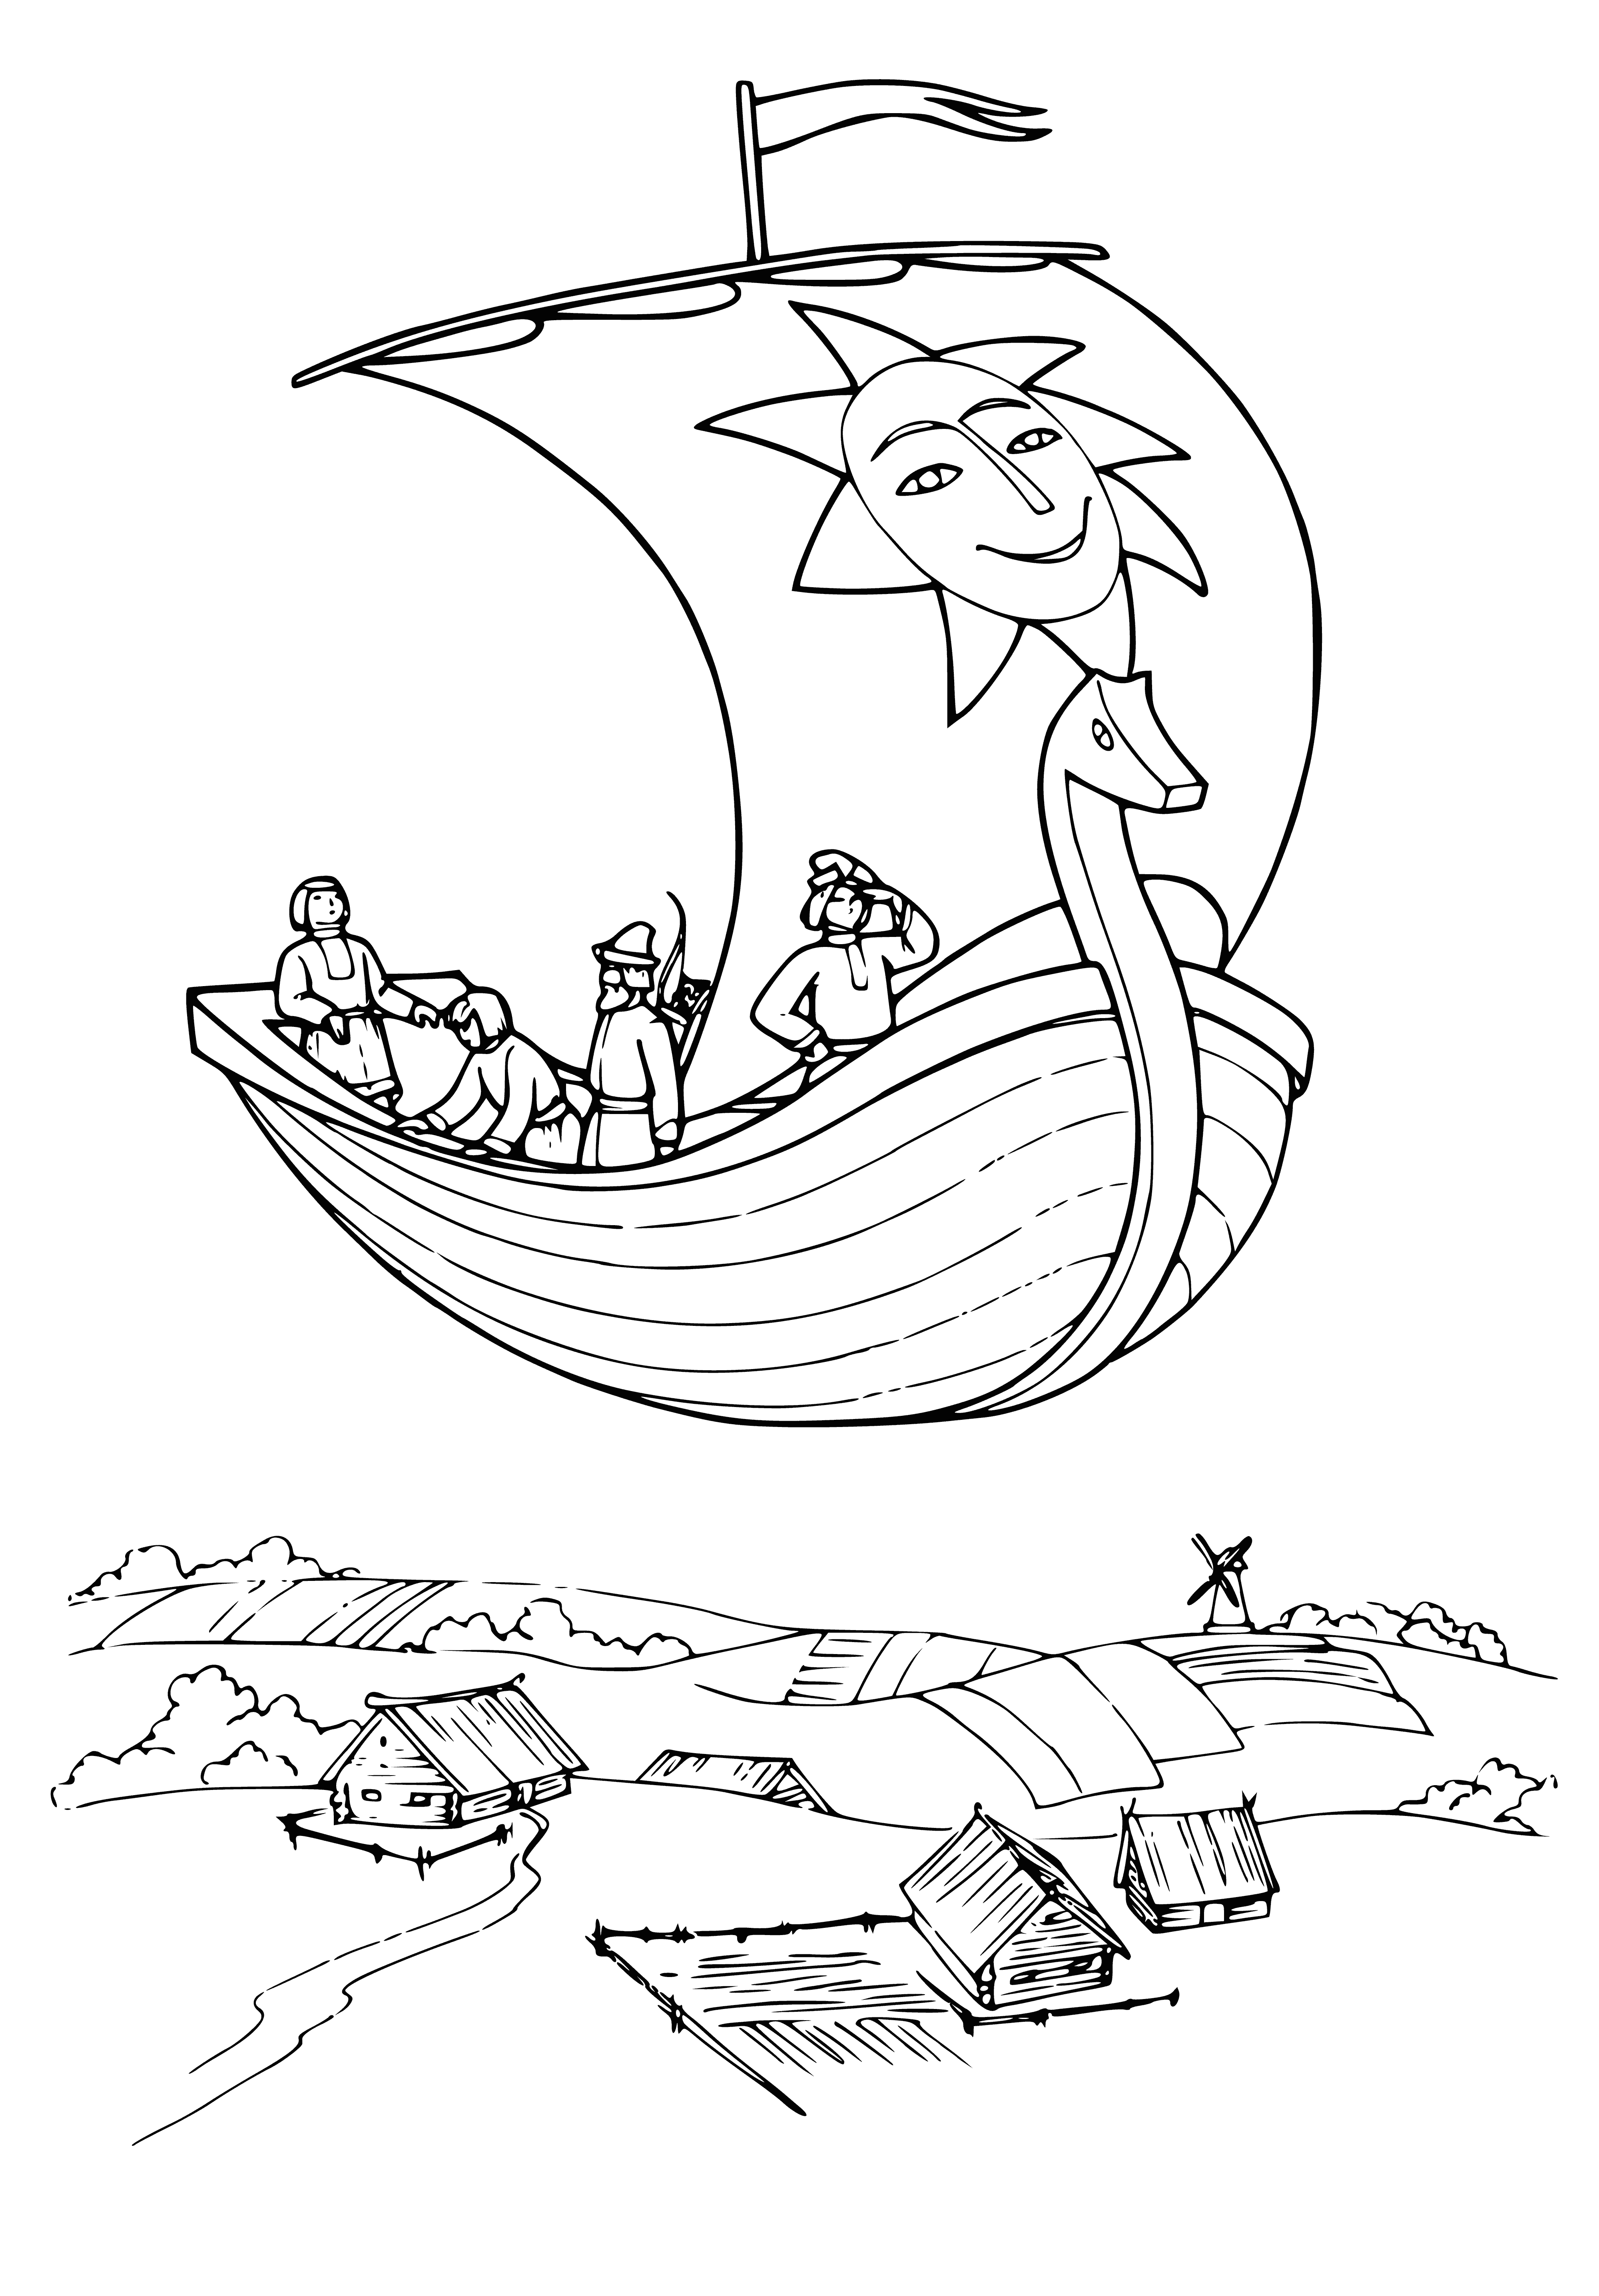 coloring page: Ship & crew captivated in Russian folk tale fly over village, exciting villagers. Soon to land.